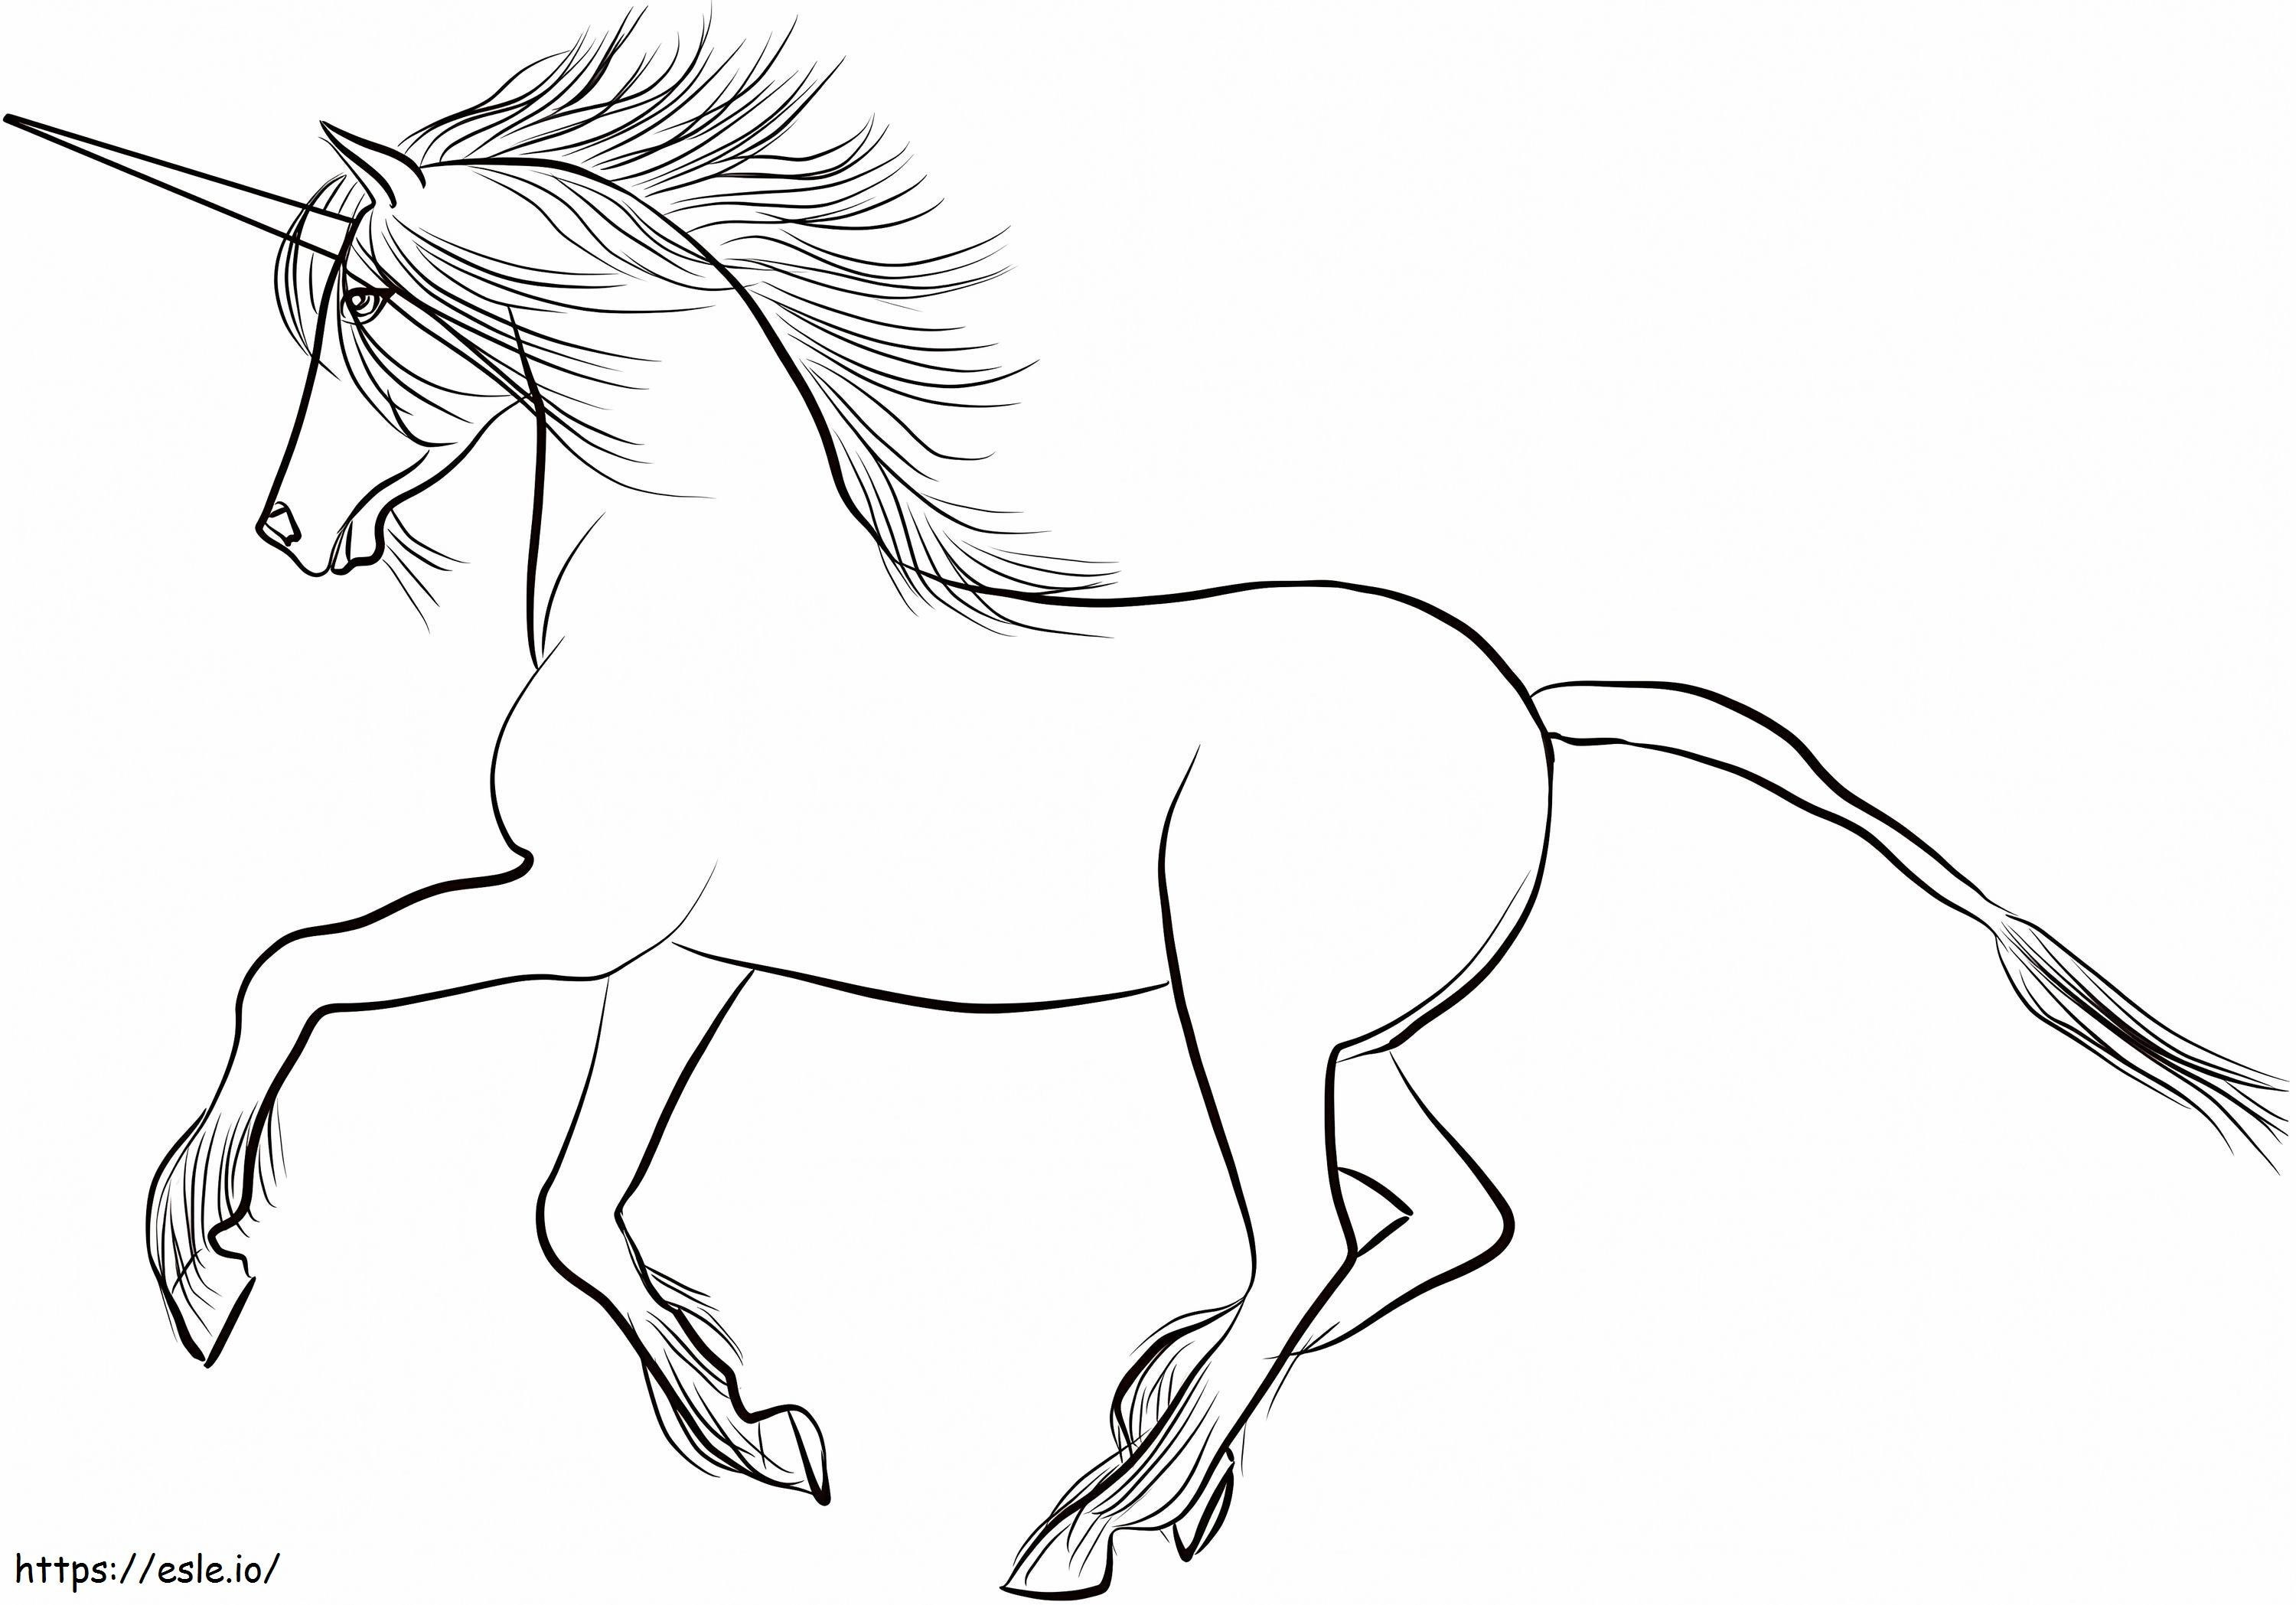 Running Unicorn 2 coloring page